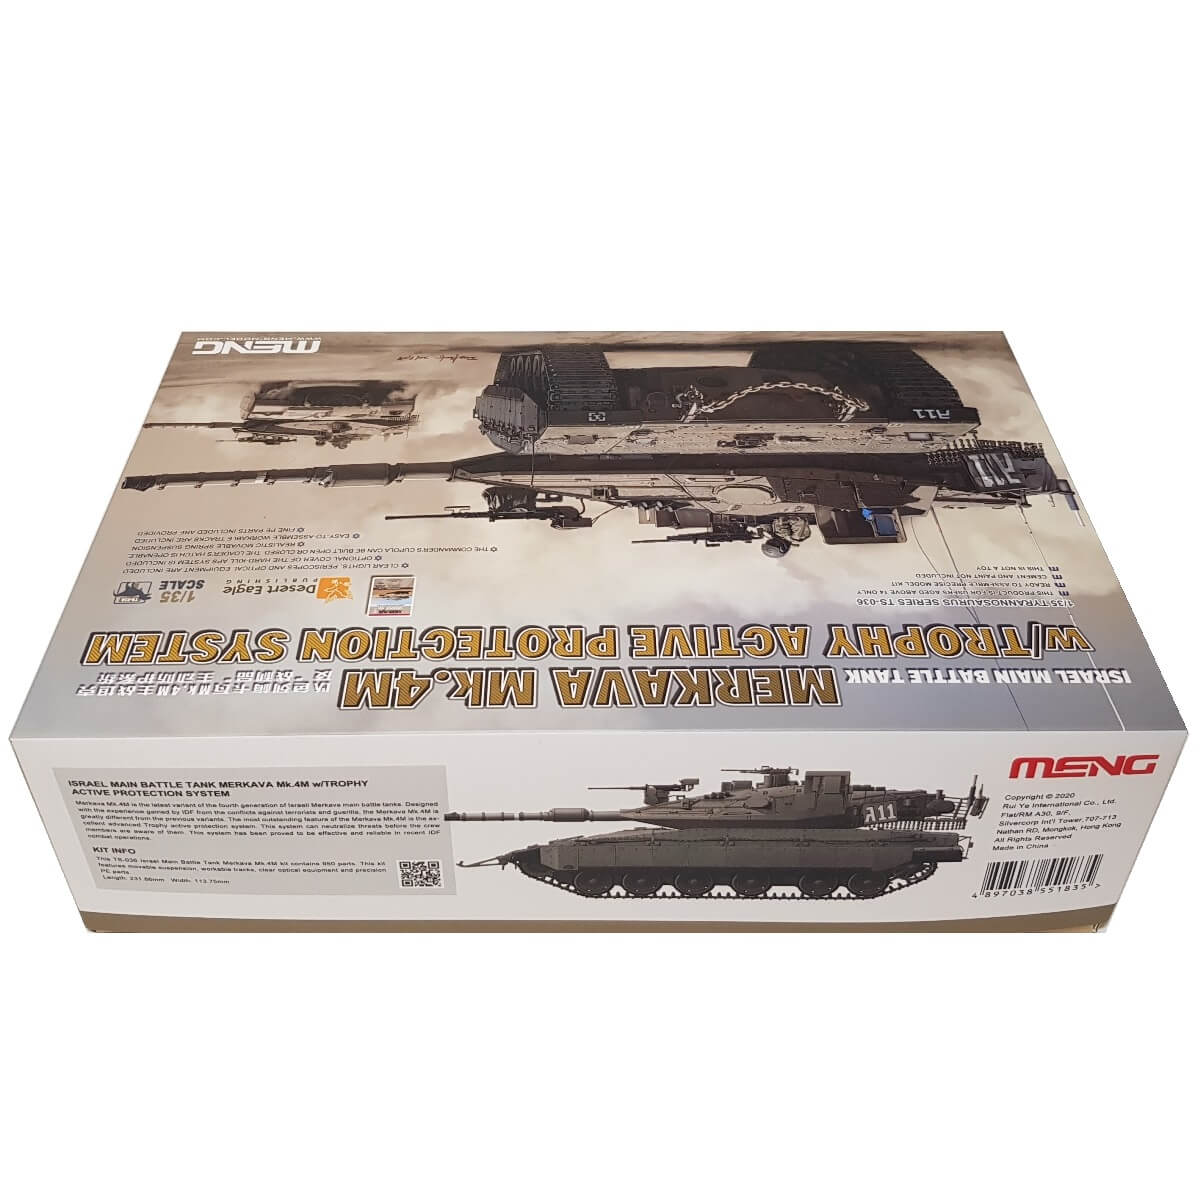 1:35 Israel Main Battle Tank Merkava Mk. 4M with TROPHY Active Protection System - MENG